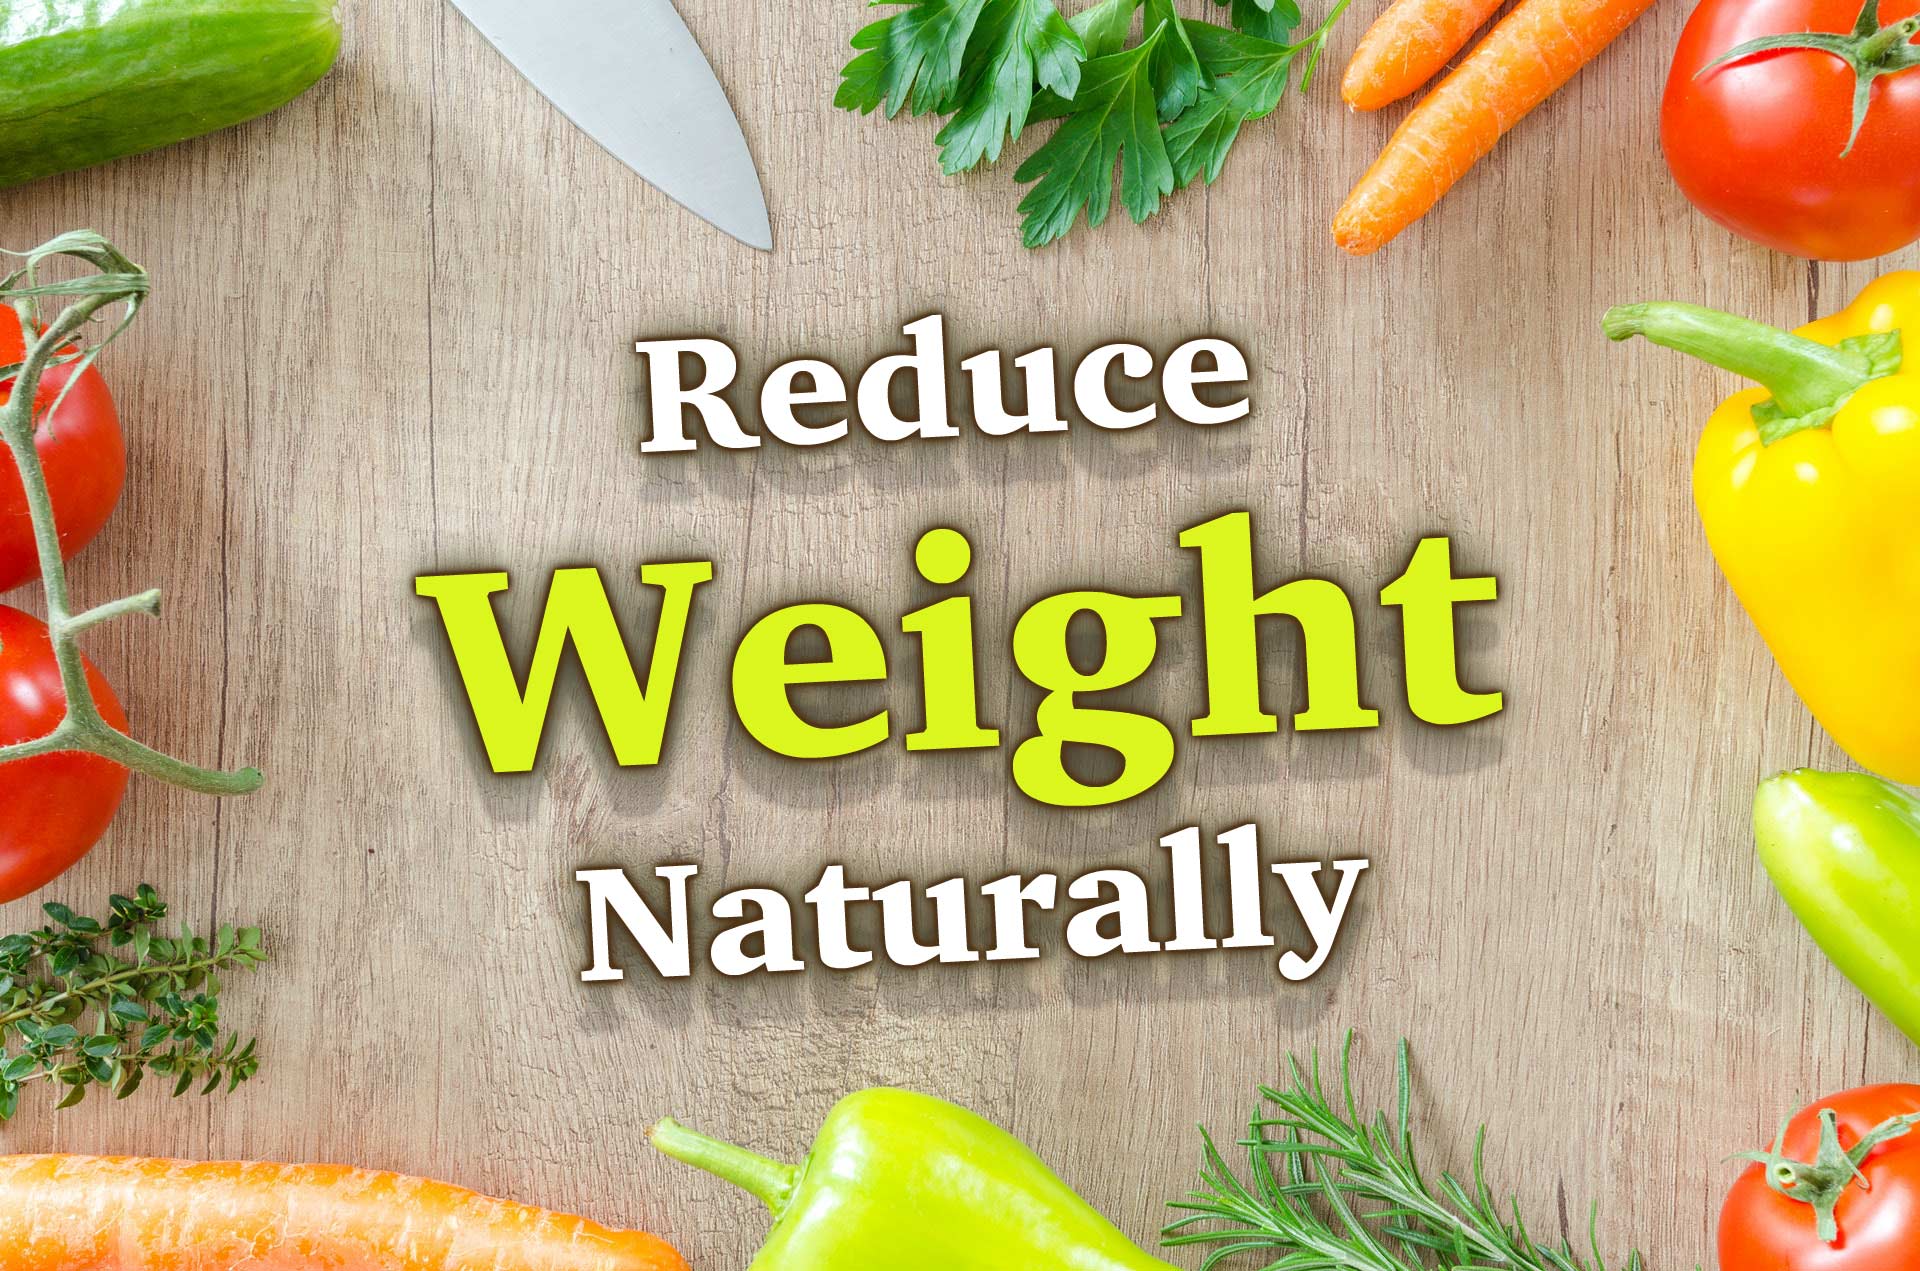 How To Reduce Weight Naturally: A Helpful Insight For Promising